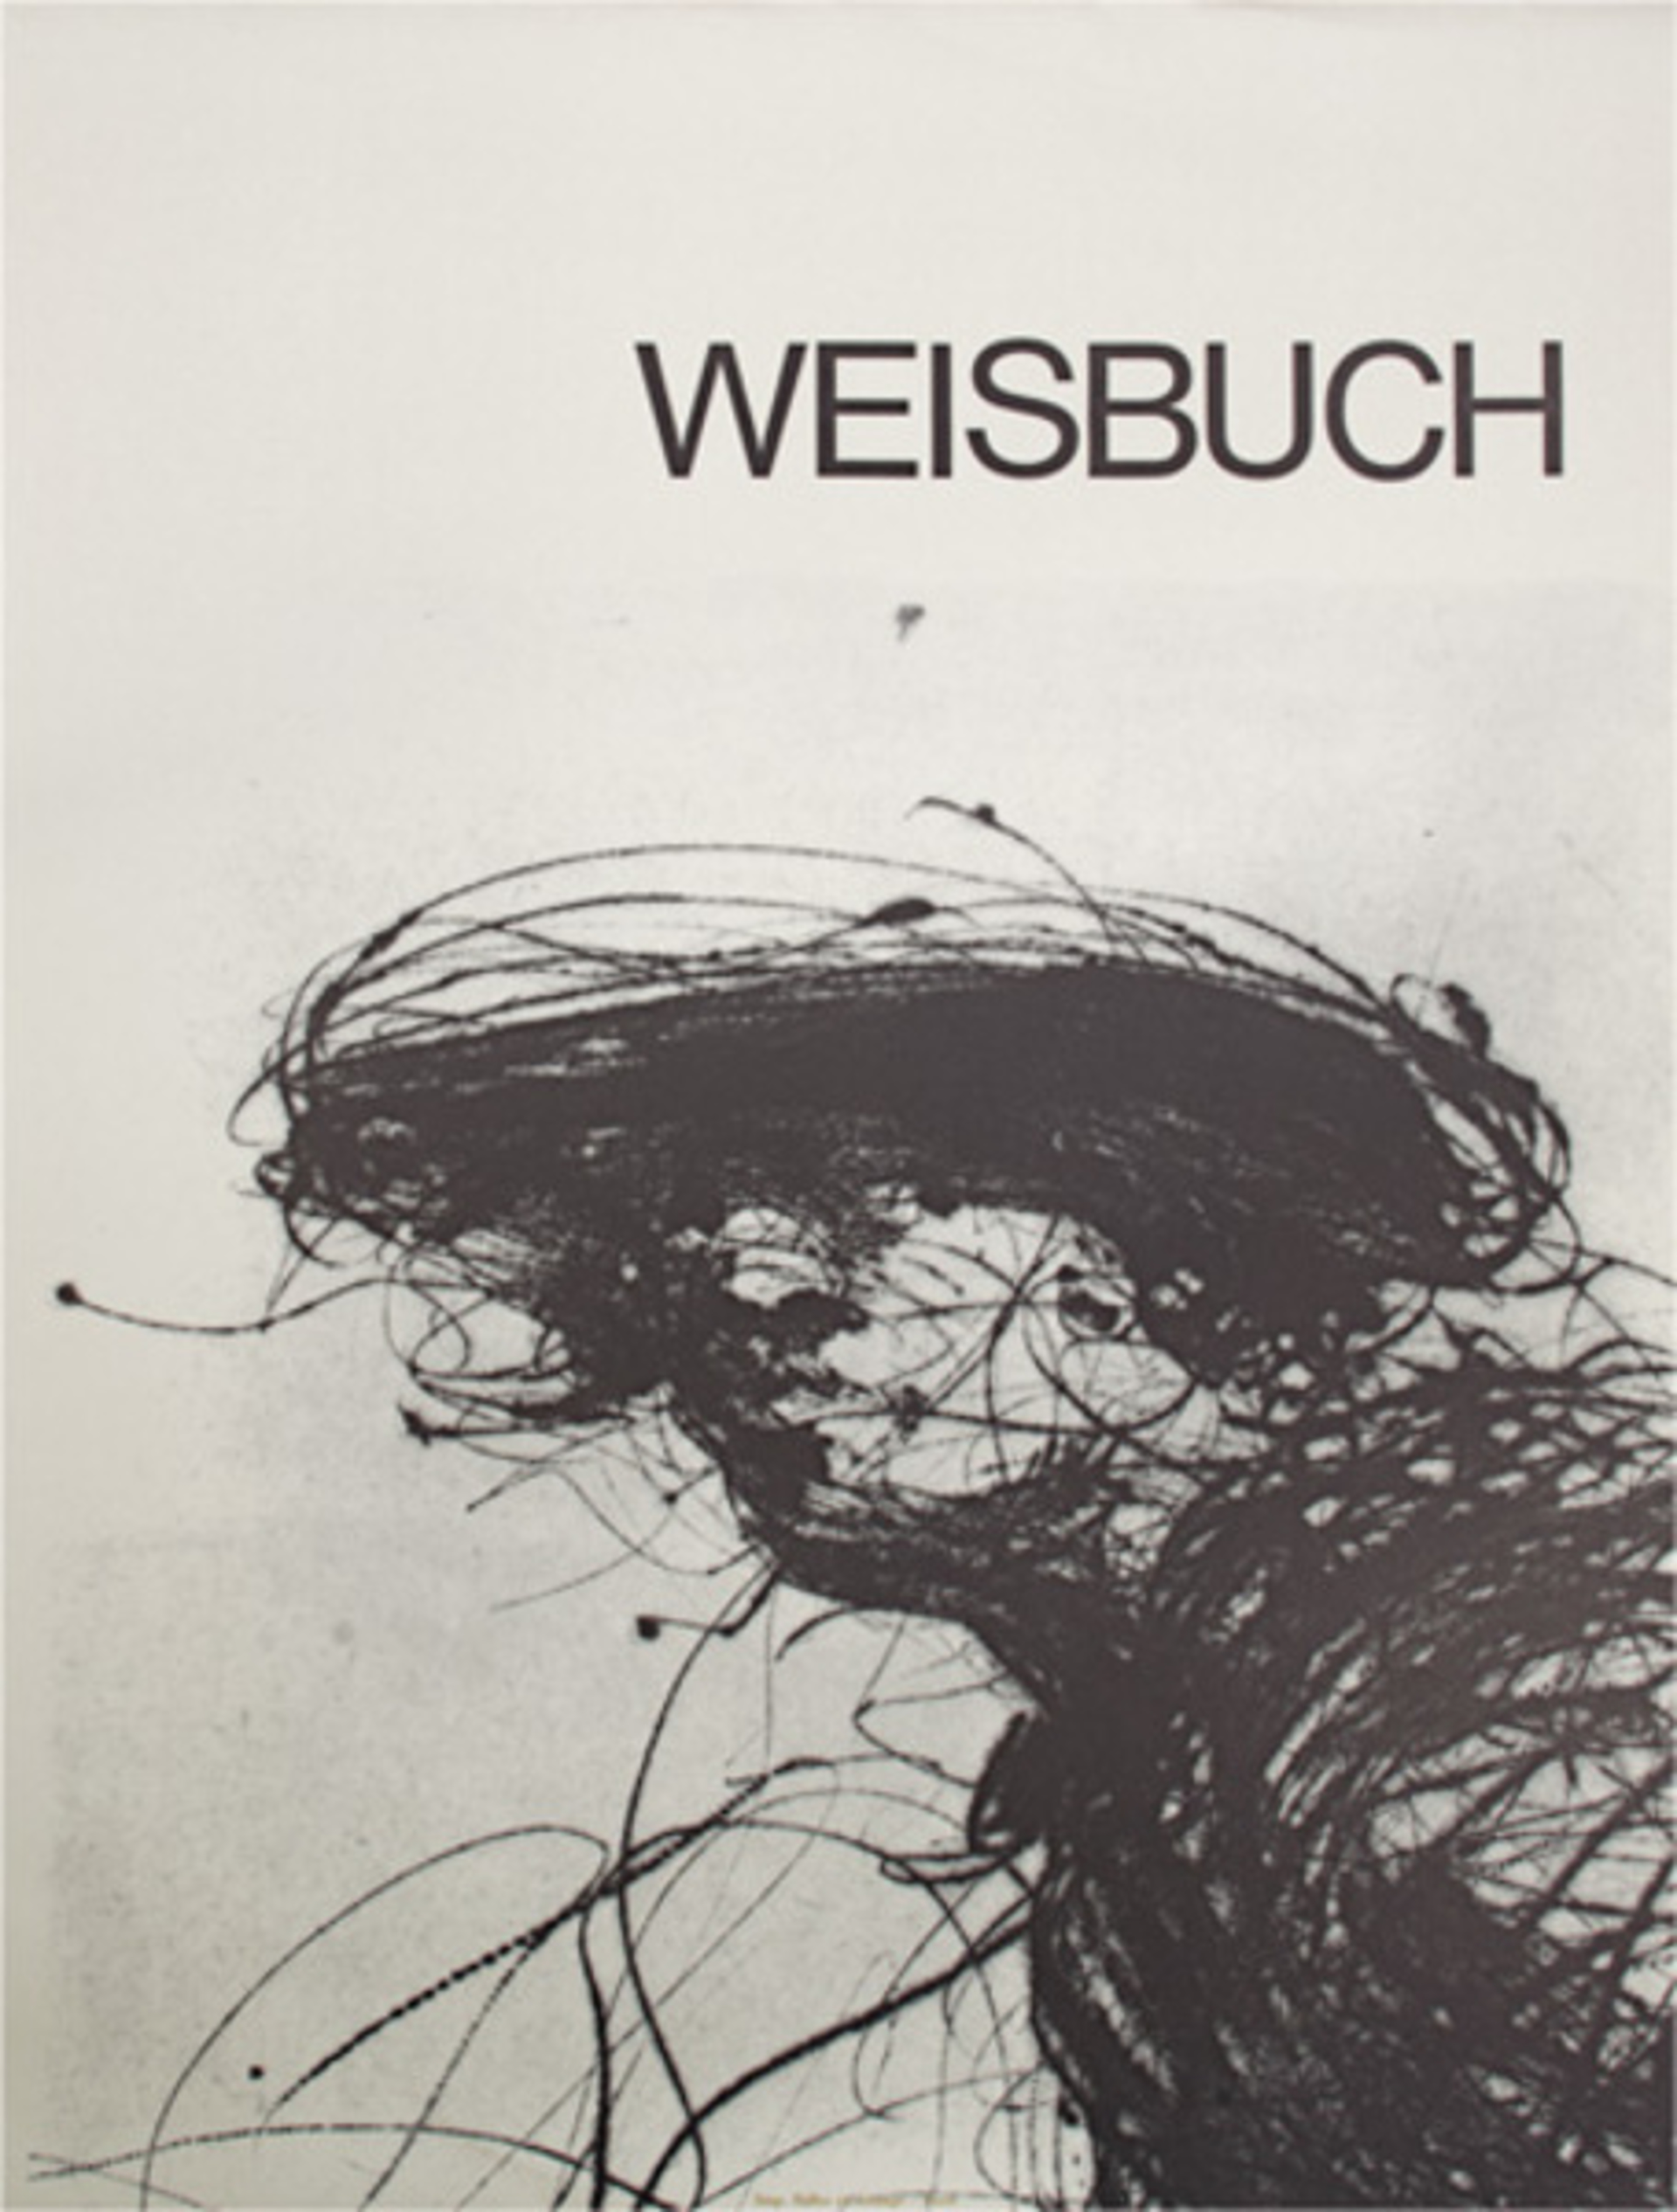 Poster, 1st State by Claude Weisbuch